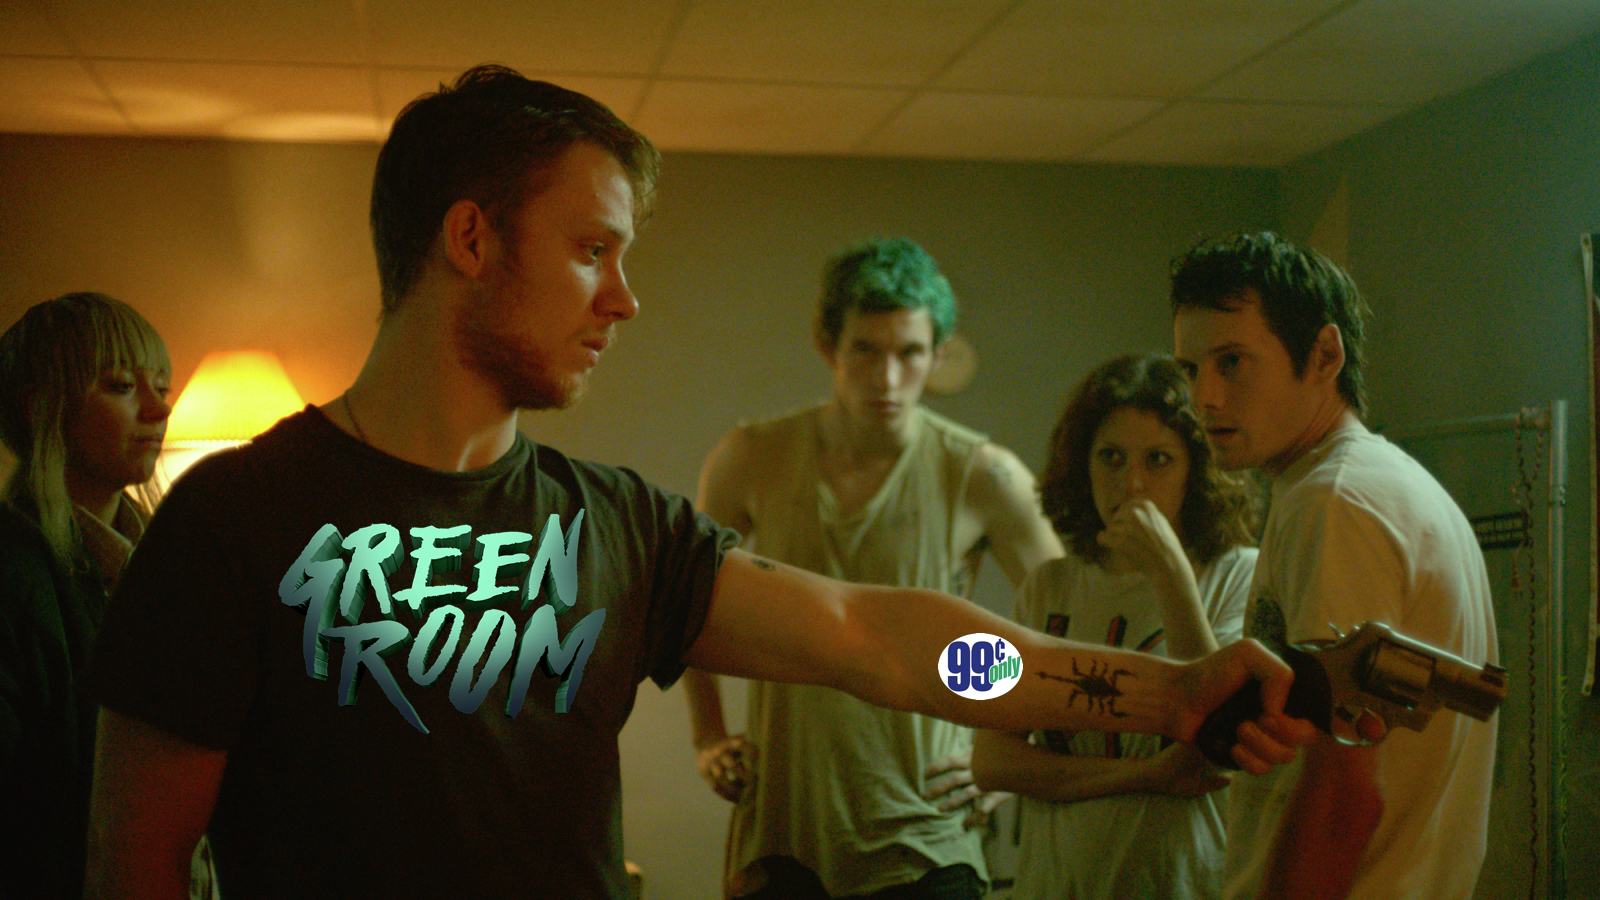 The (other) $0. 99 movie of the week: ‘green room’